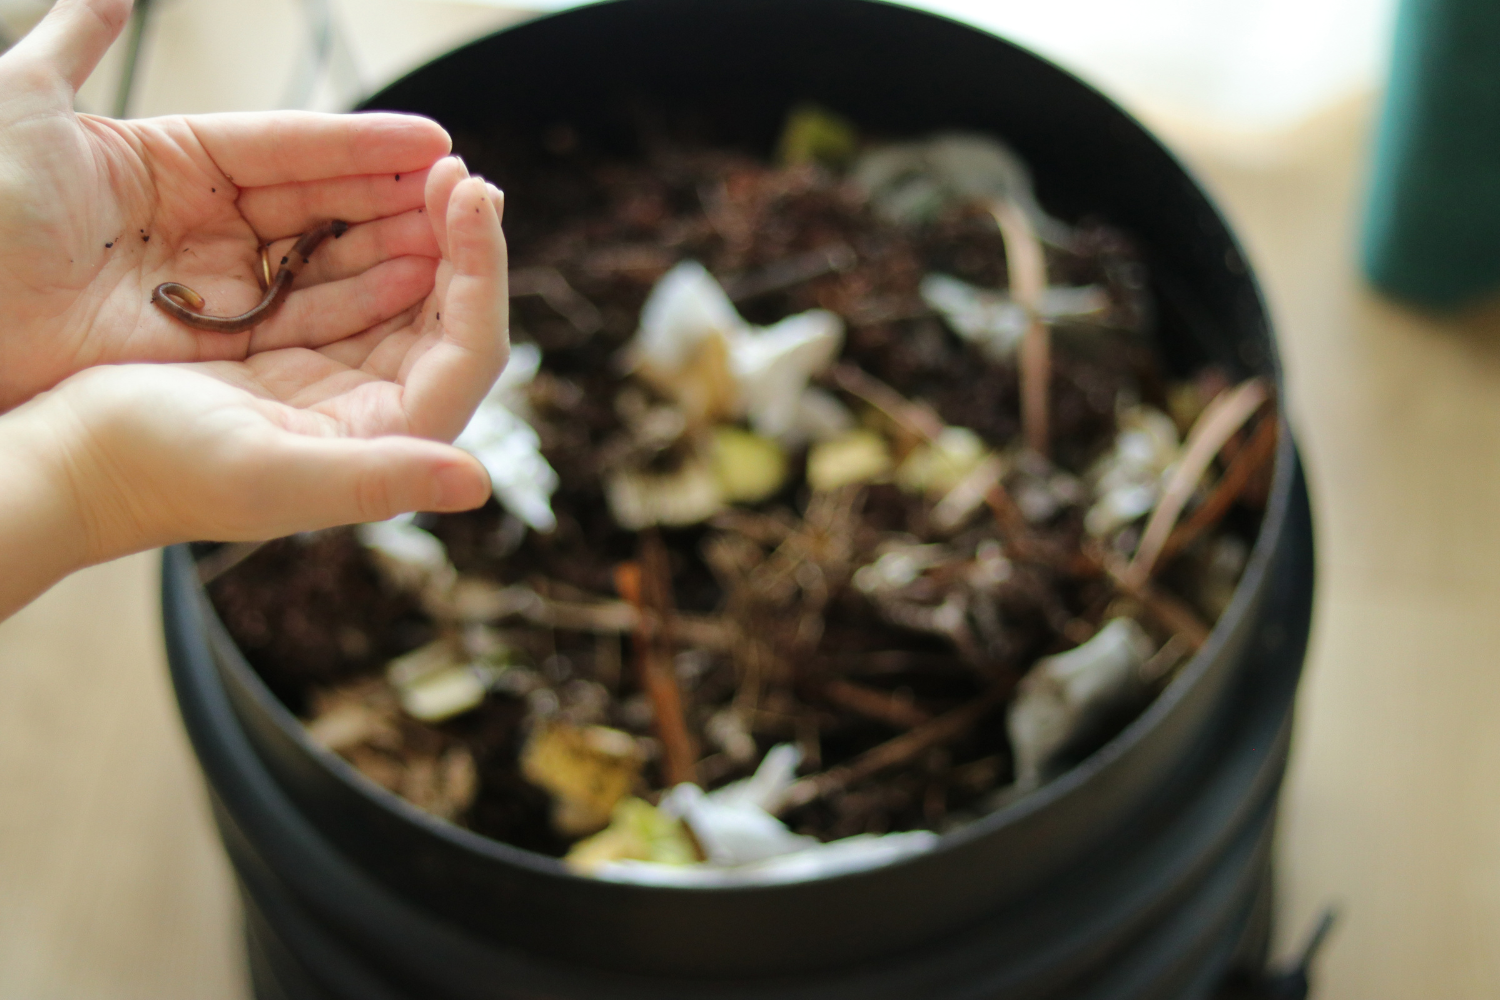 How Does Worm Composting Work?